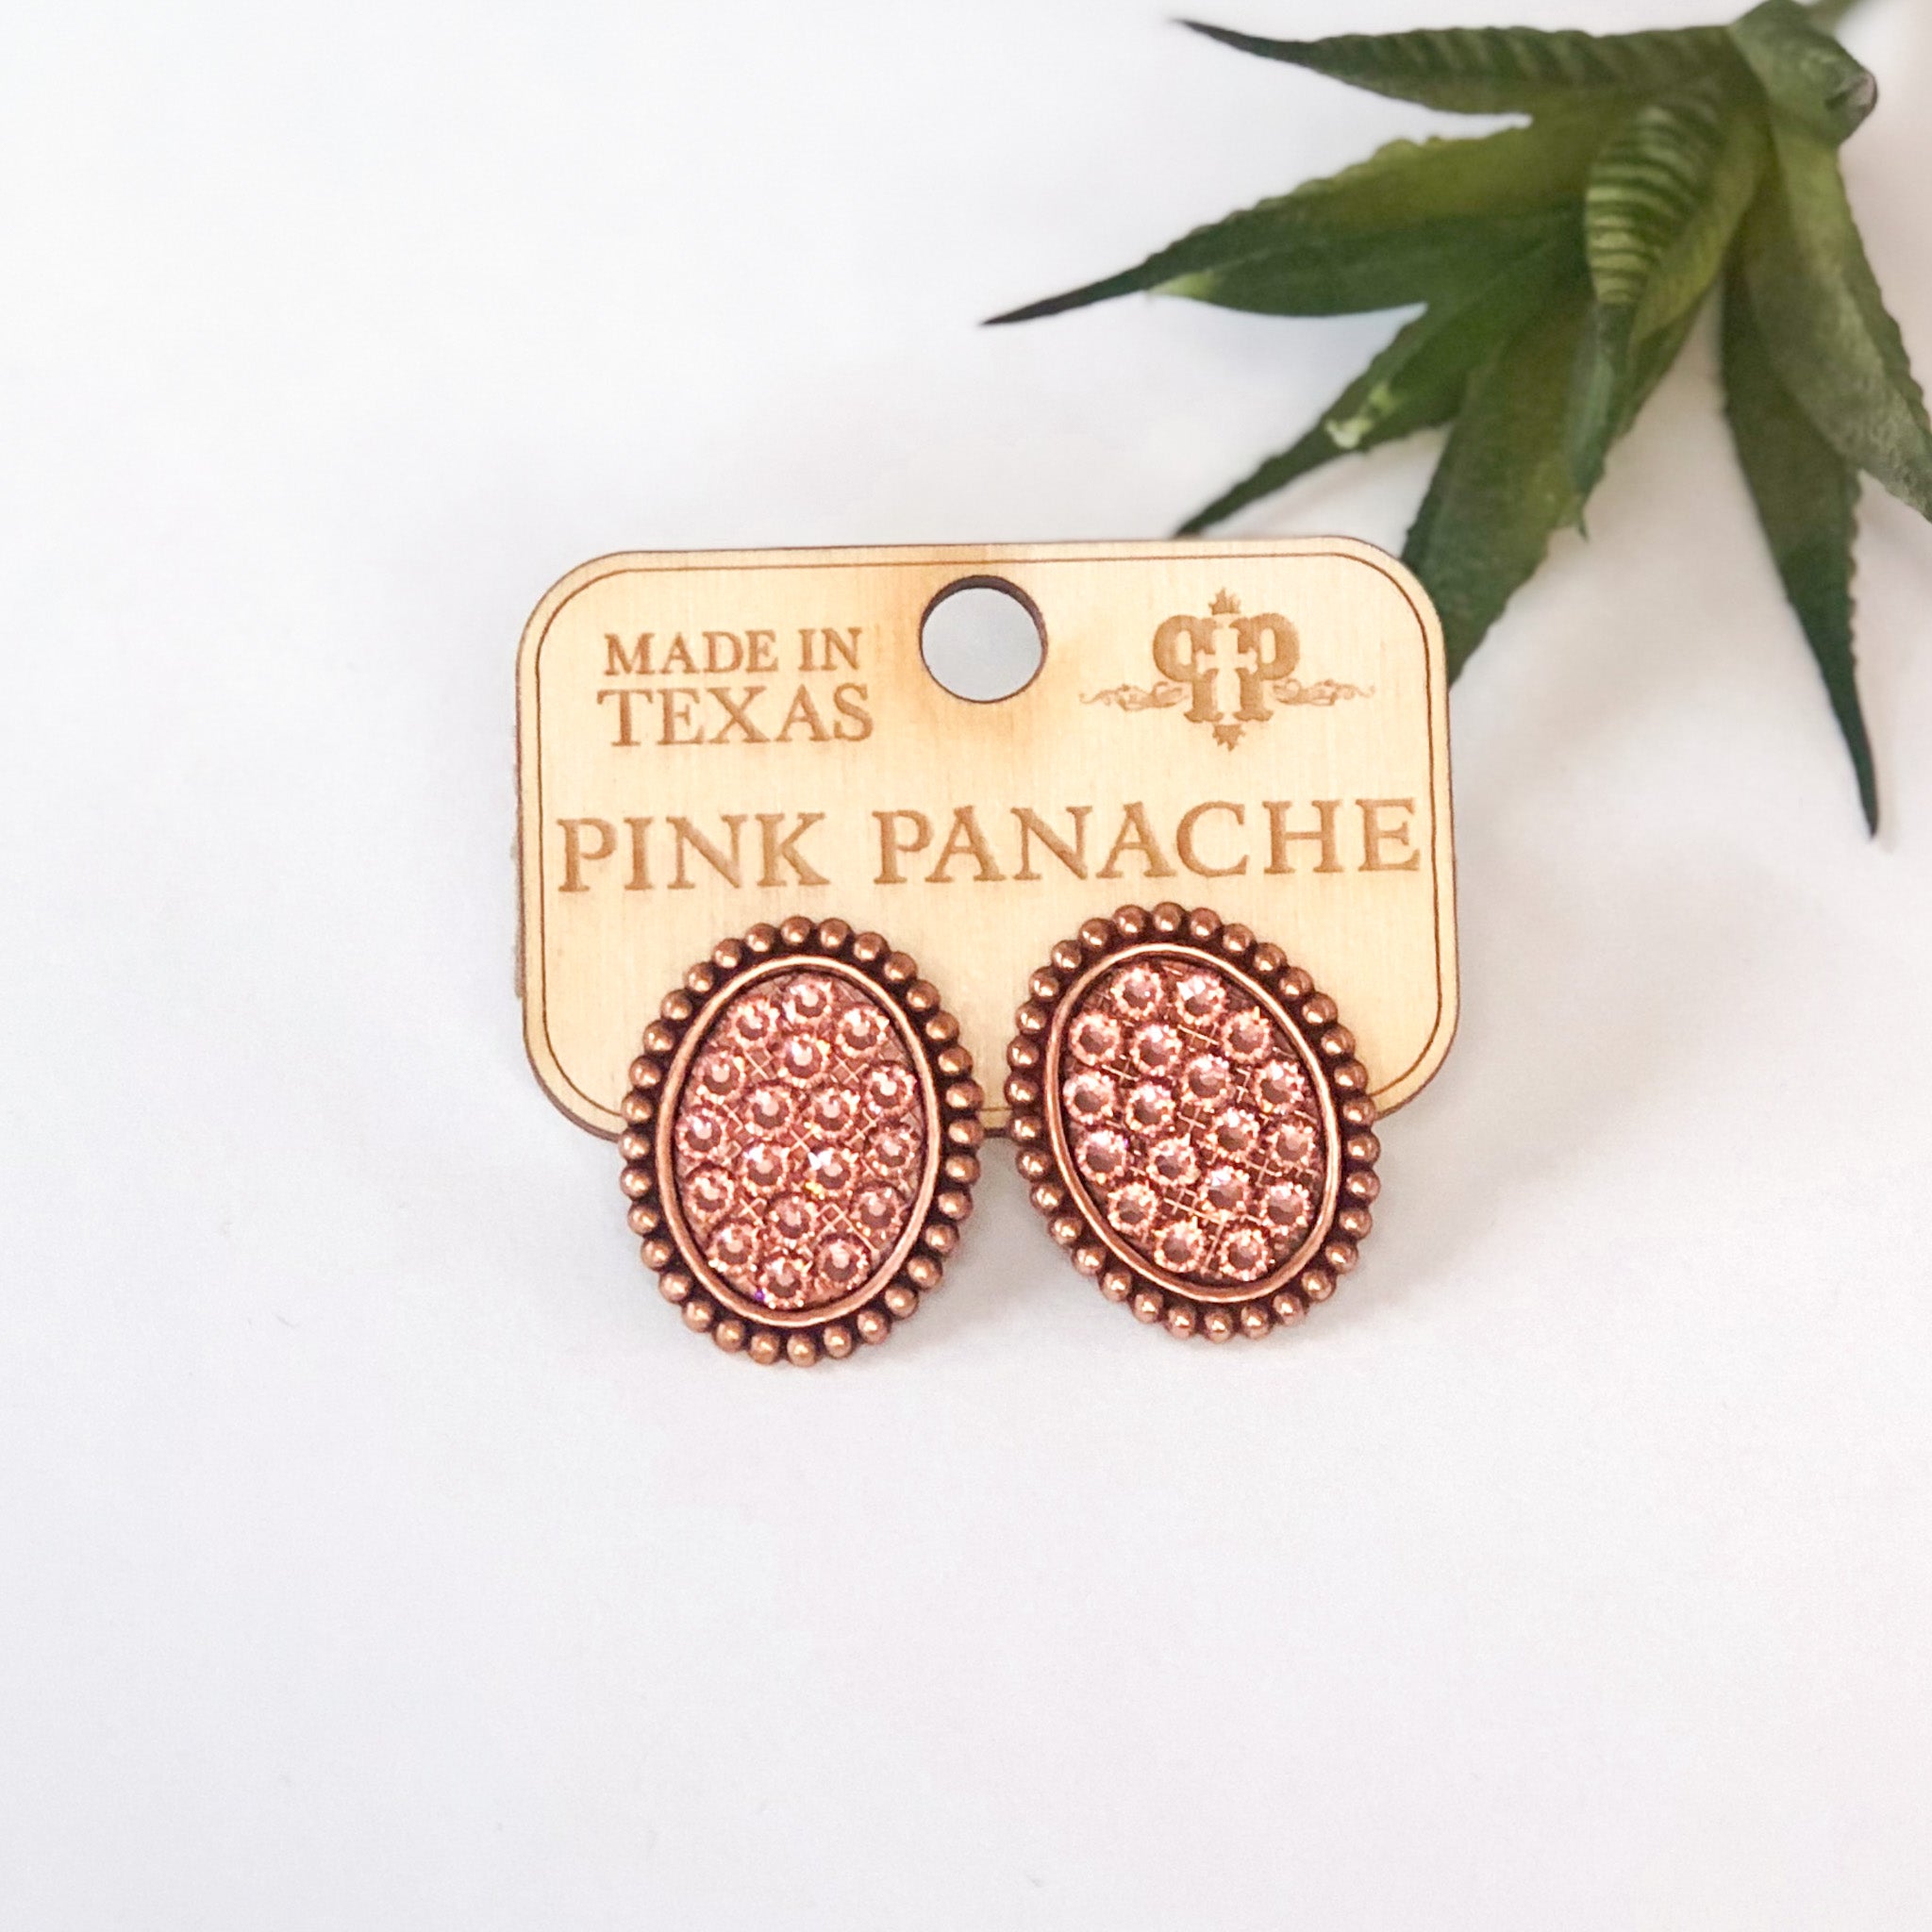 Pink Panache Mini Rose Gold Oval Stud Earrings with Rose Blush Crystals - Giddy Up Glamour Boutique